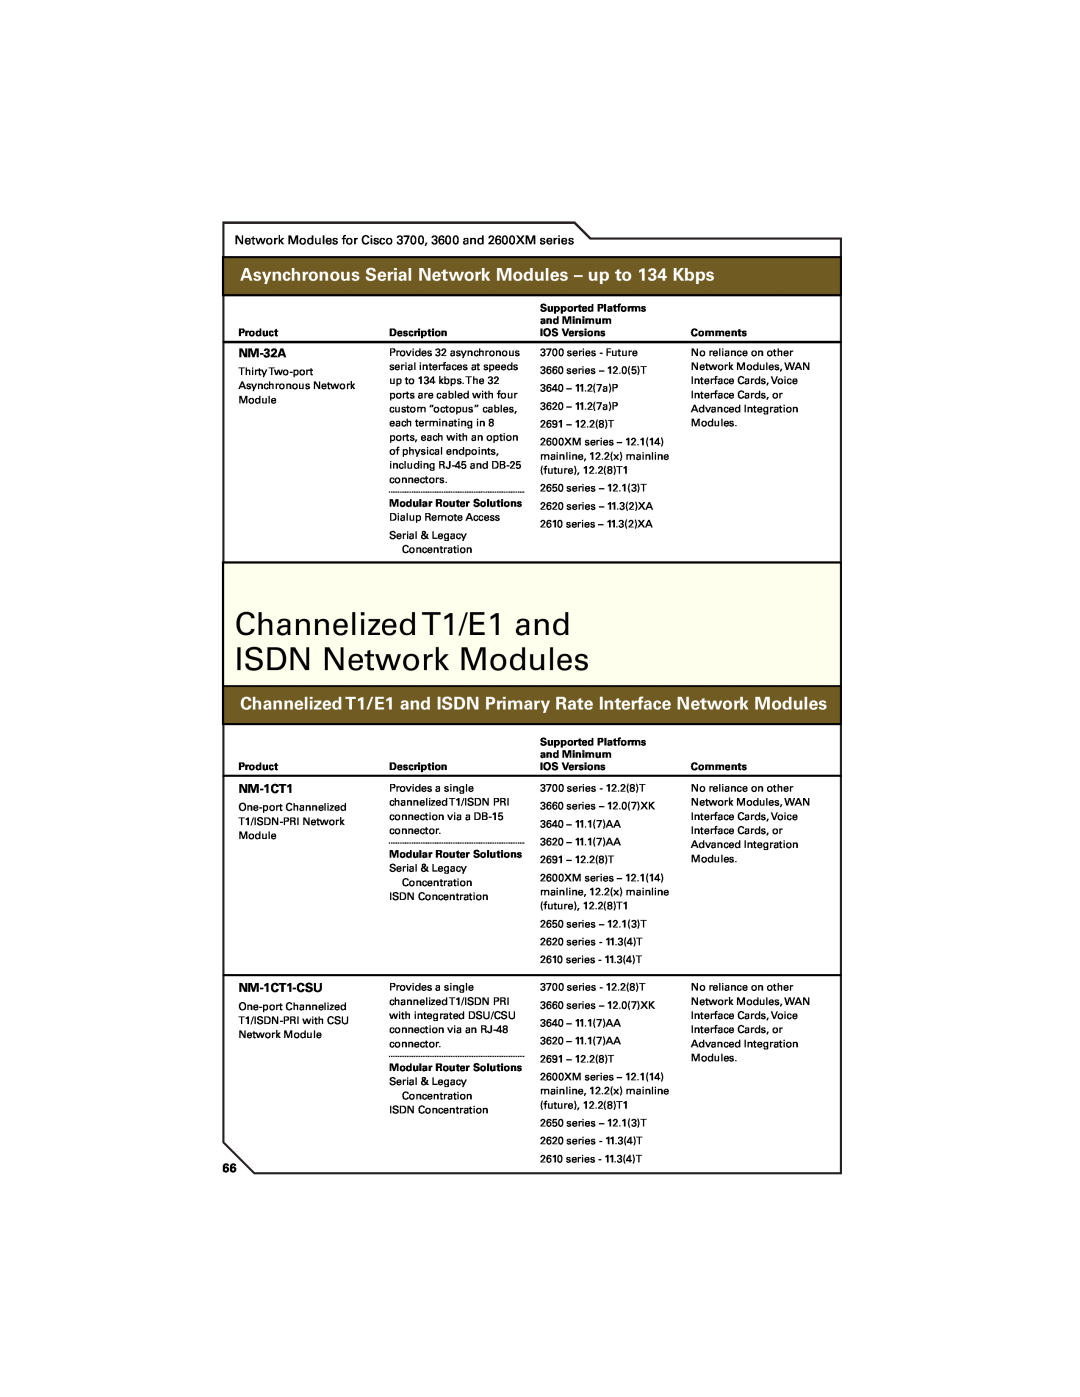 Cisco Systems 7400, 7300, 7200 manual Channelized T1/E1 and ISDN Network Modules 